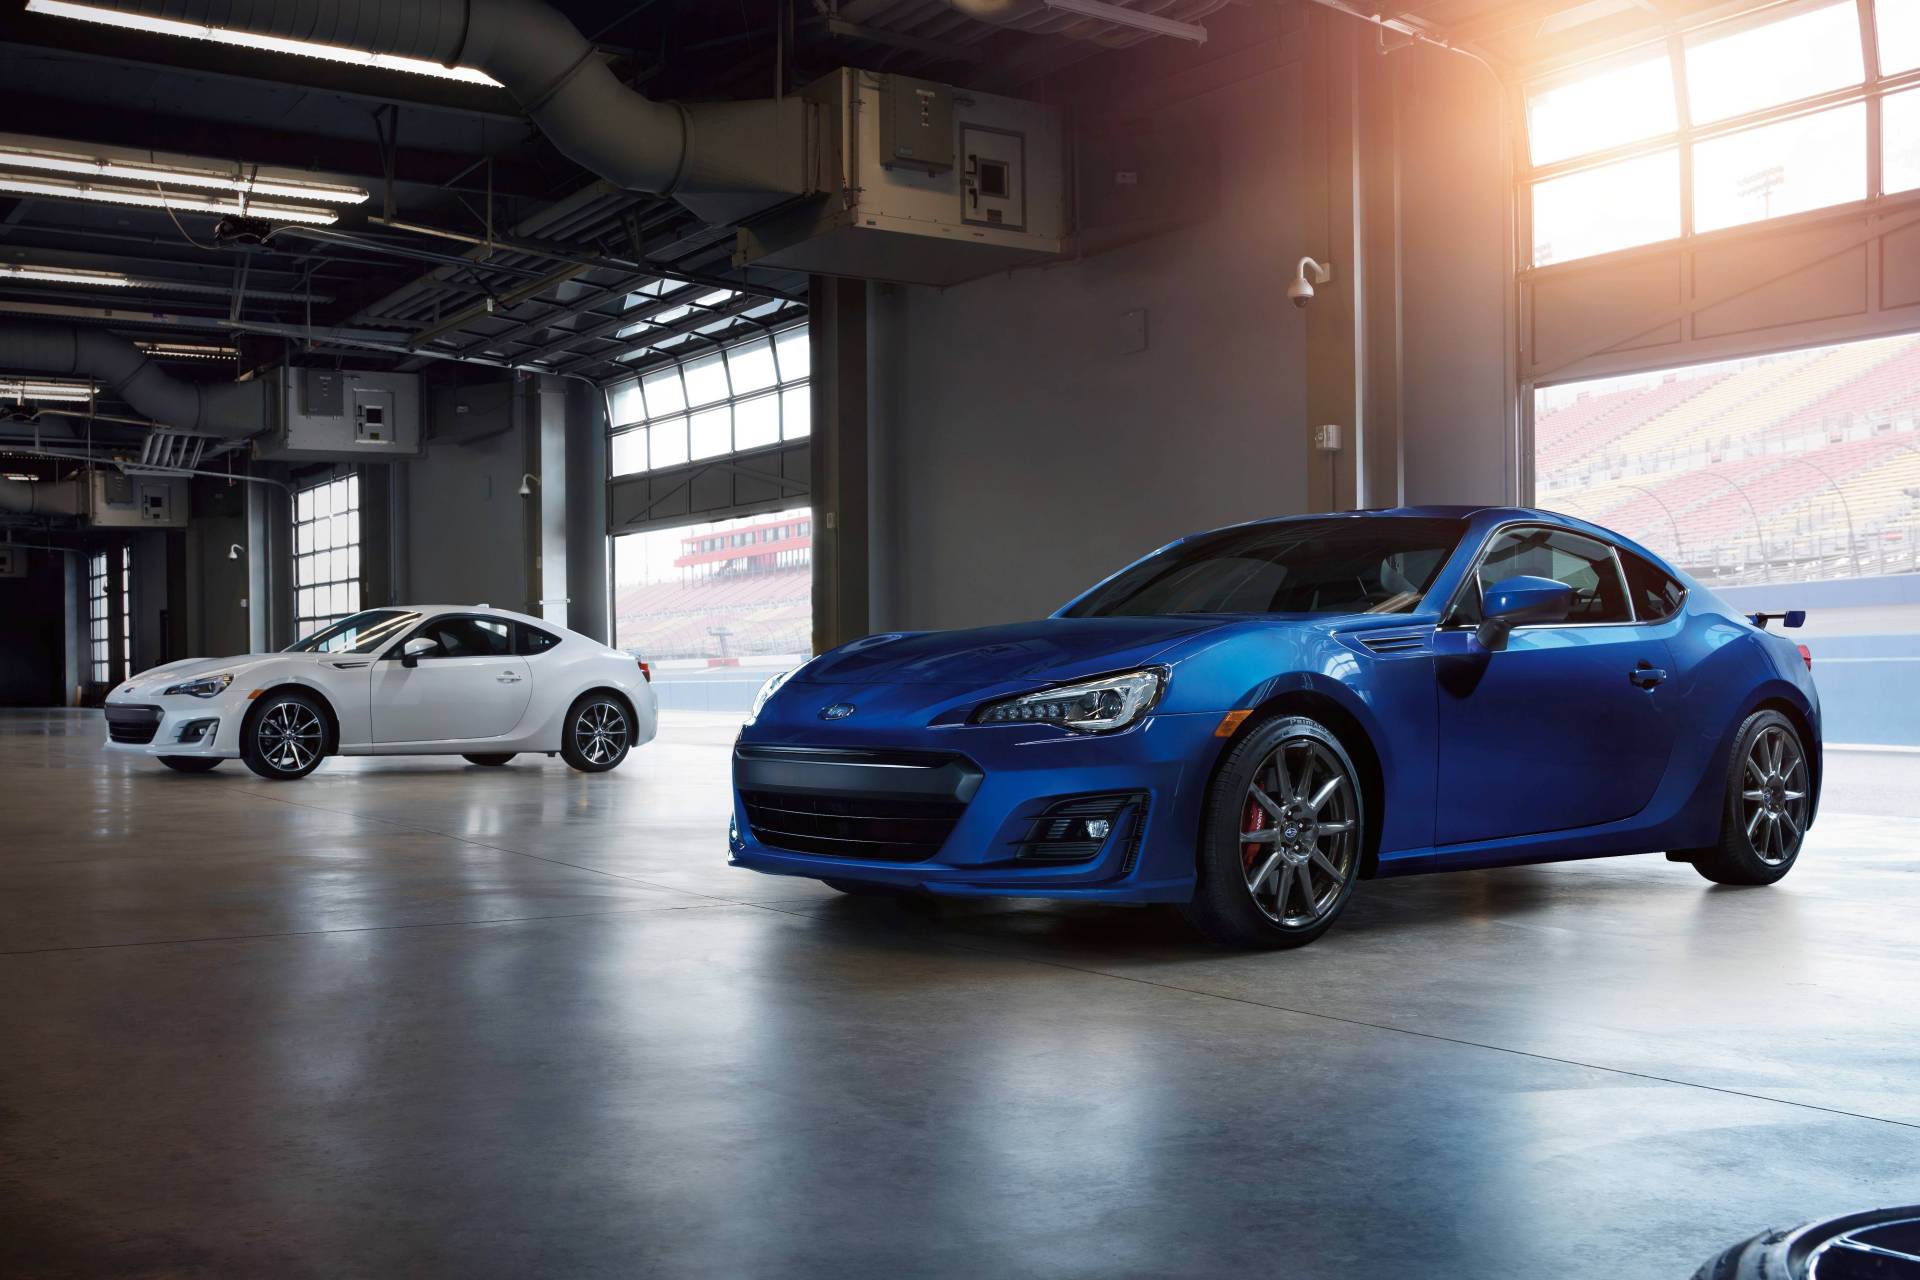 2021-subaru-brz-to-feature-fb24-n-a-boxer-engine-137650_1